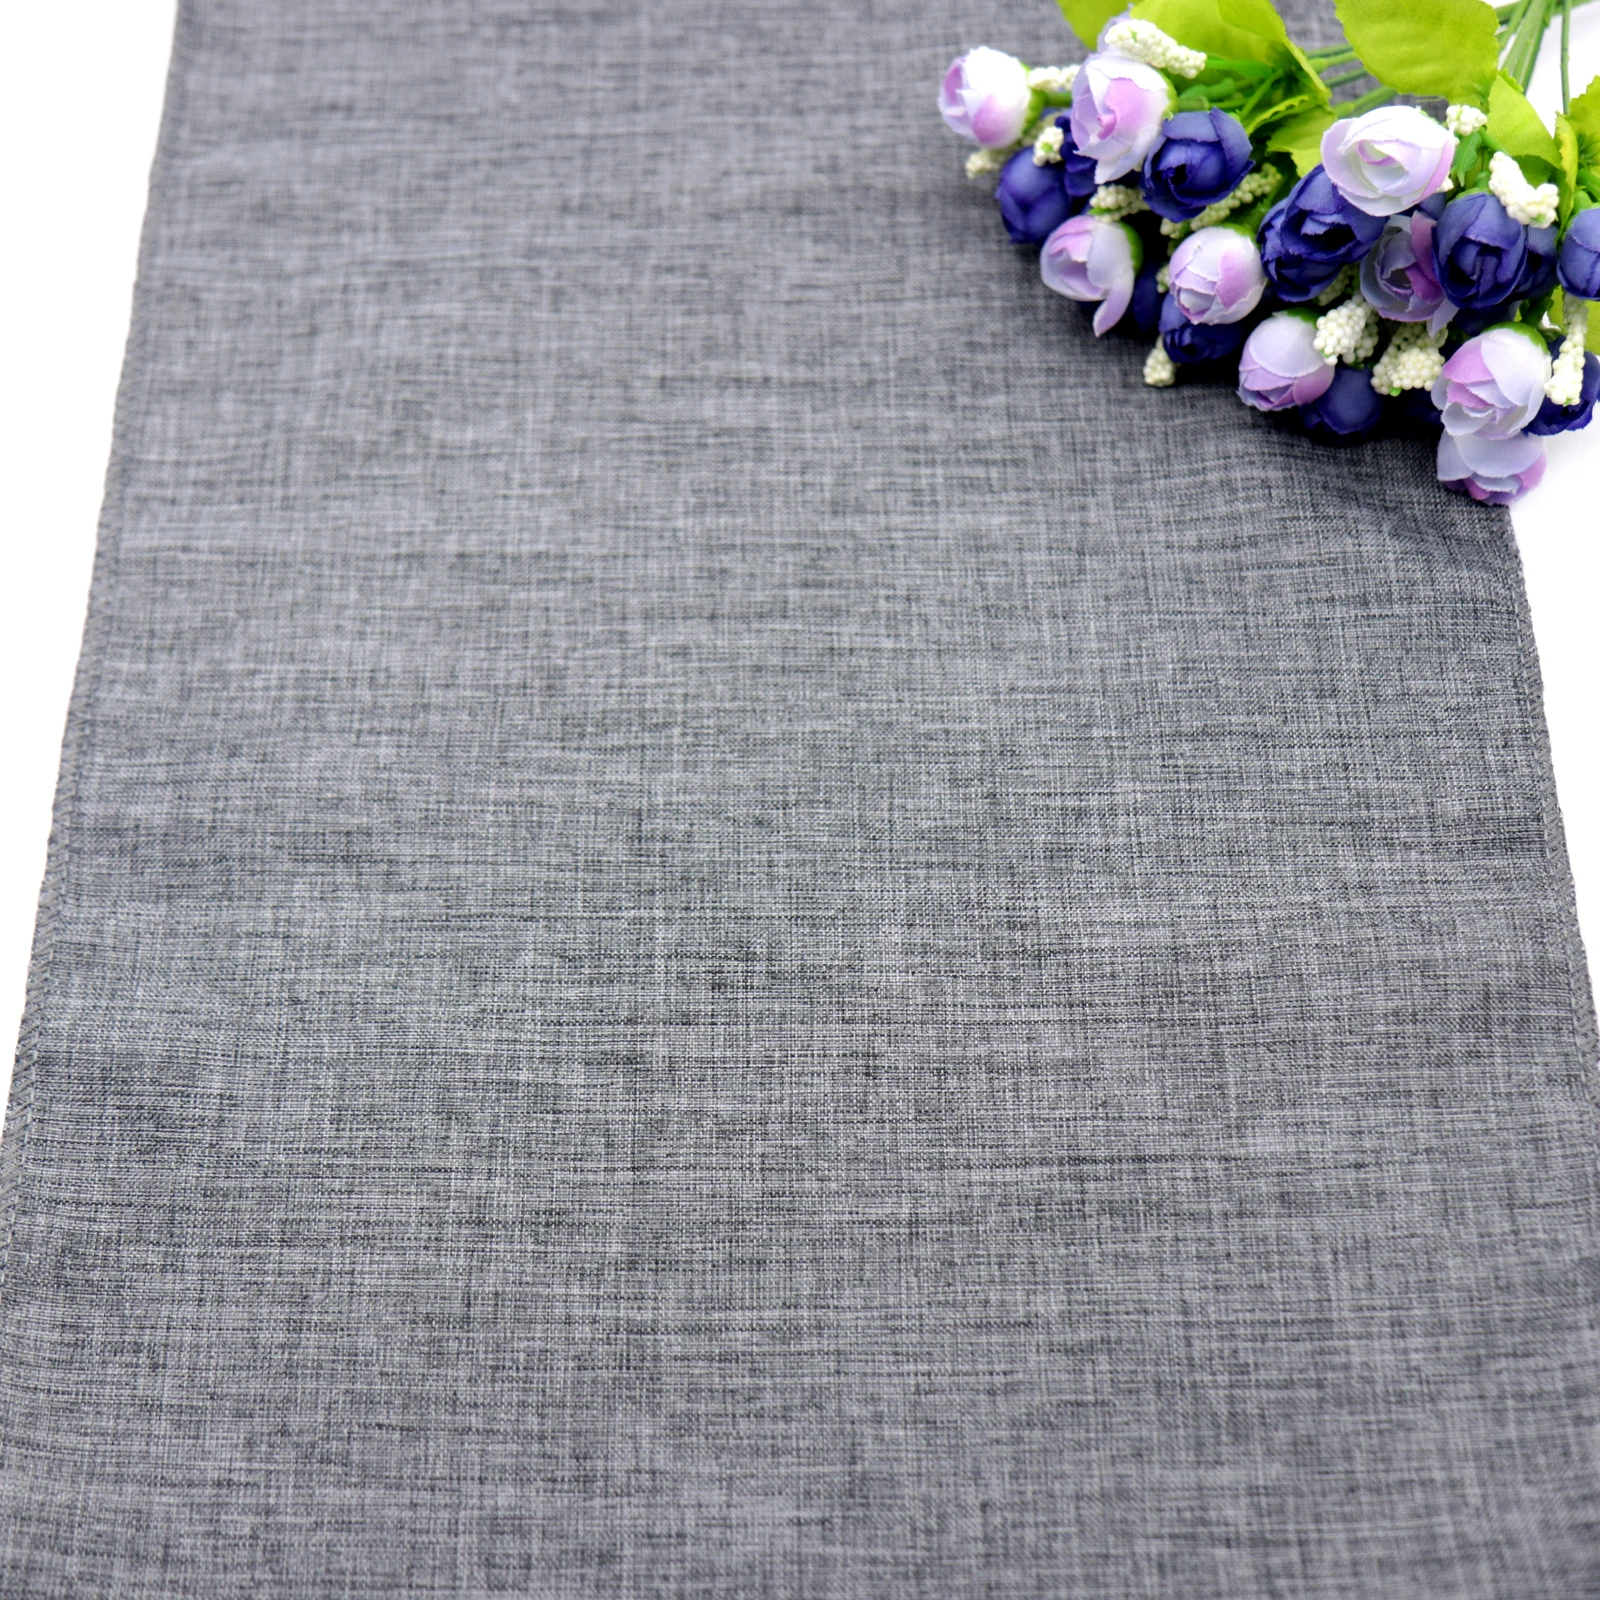 Gray Khaki Burlap Table Runner Jute Imitated Linen Tablecloth Rustic Wedding Party Banquet Decoration Home Textiles Overlay images - 6